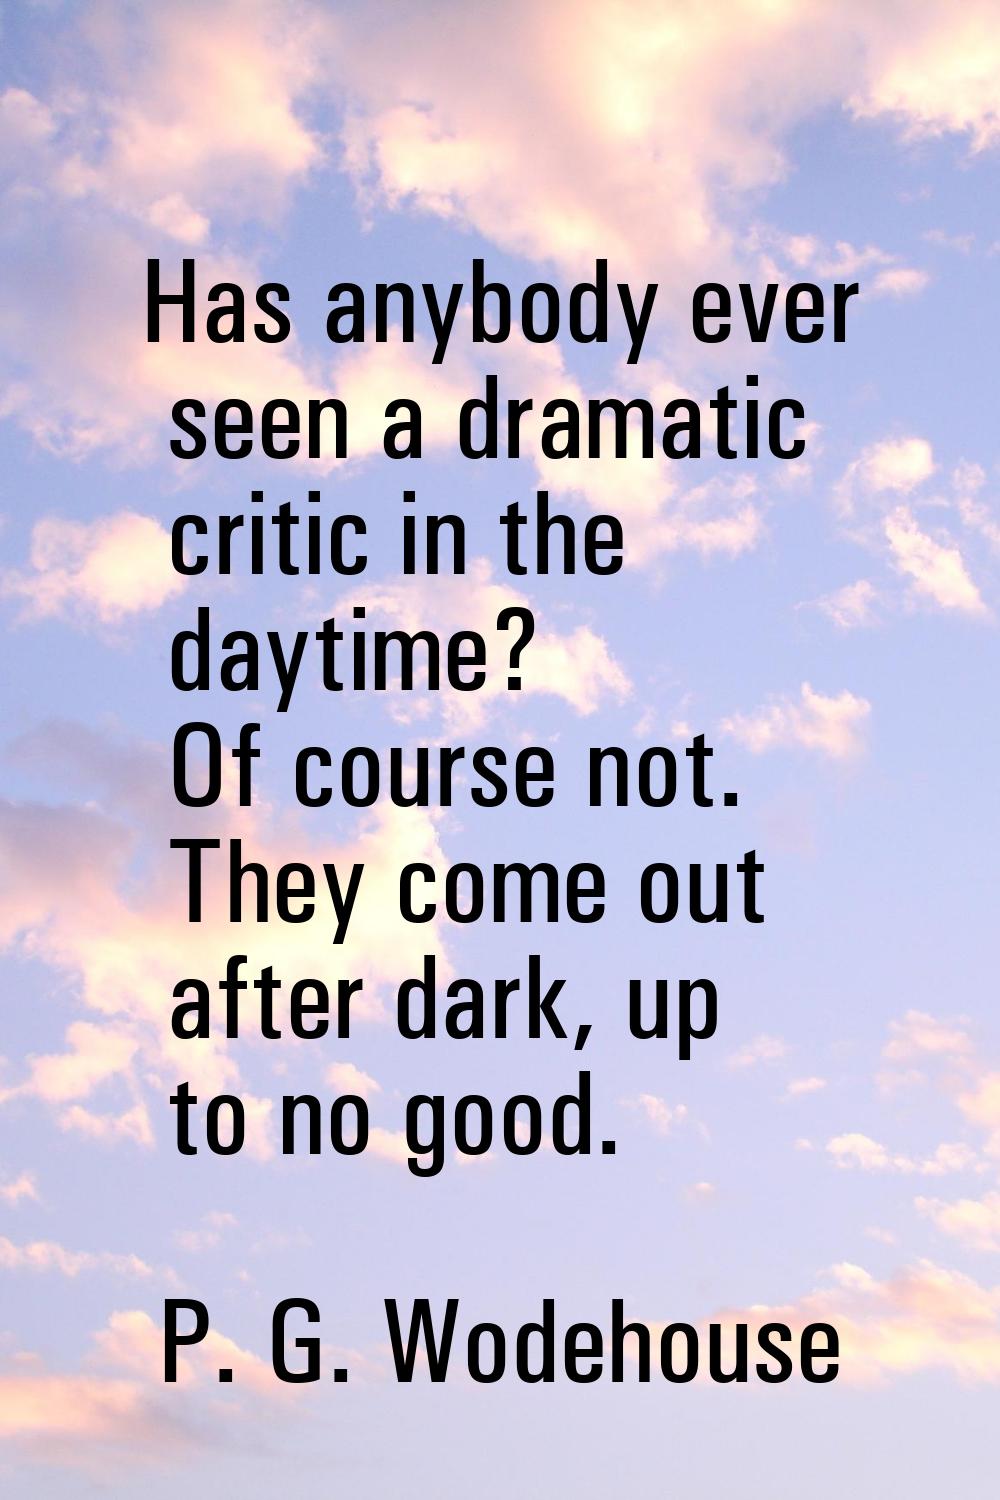 Has anybody ever seen a dramatic critic in the daytime? Of course not. They come out after dark, up